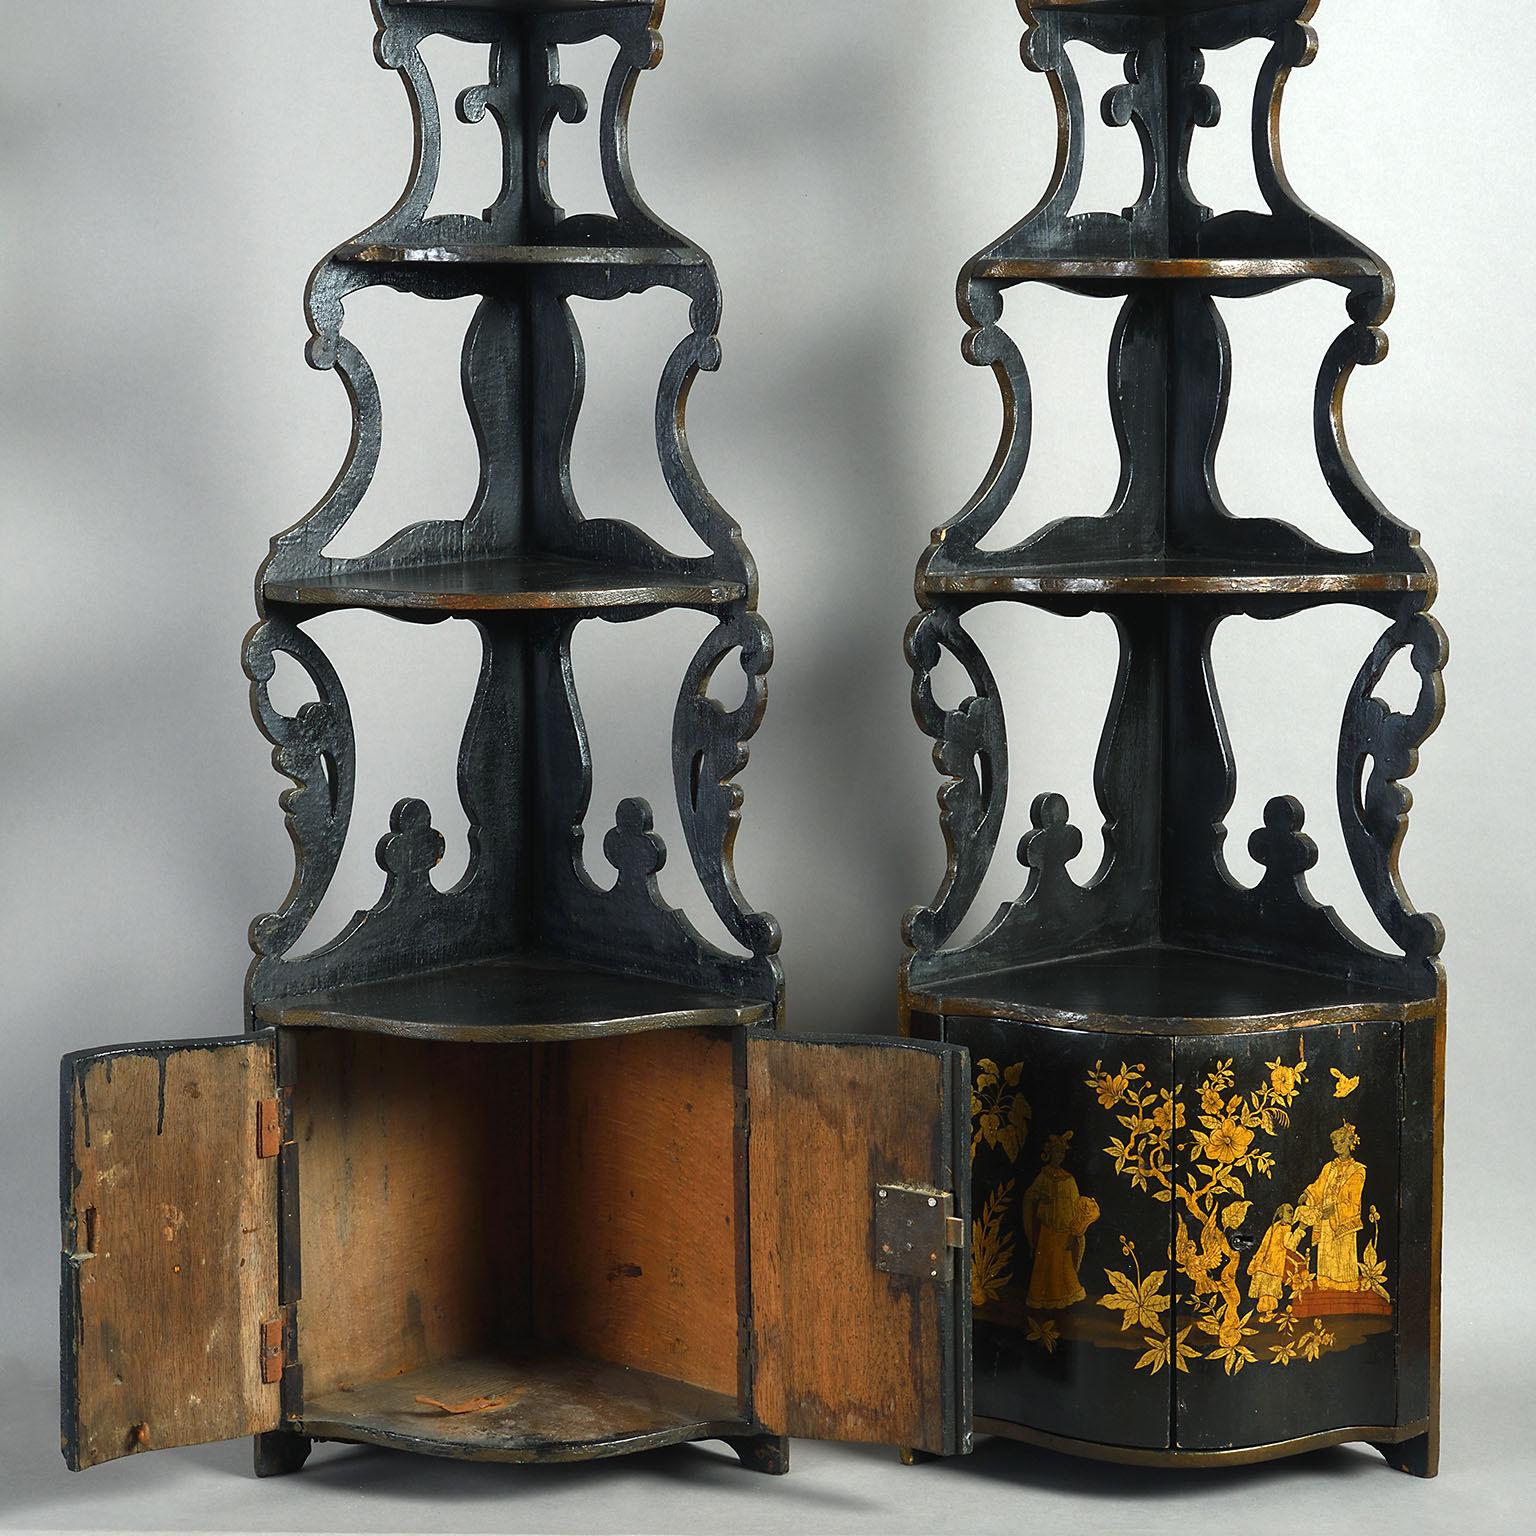 Each with three graduated serpentine shelves on scroll supports above a pair of chinoiserie decorated doors; one mid 18th century, the other possibly of a later date made as a companion piece.